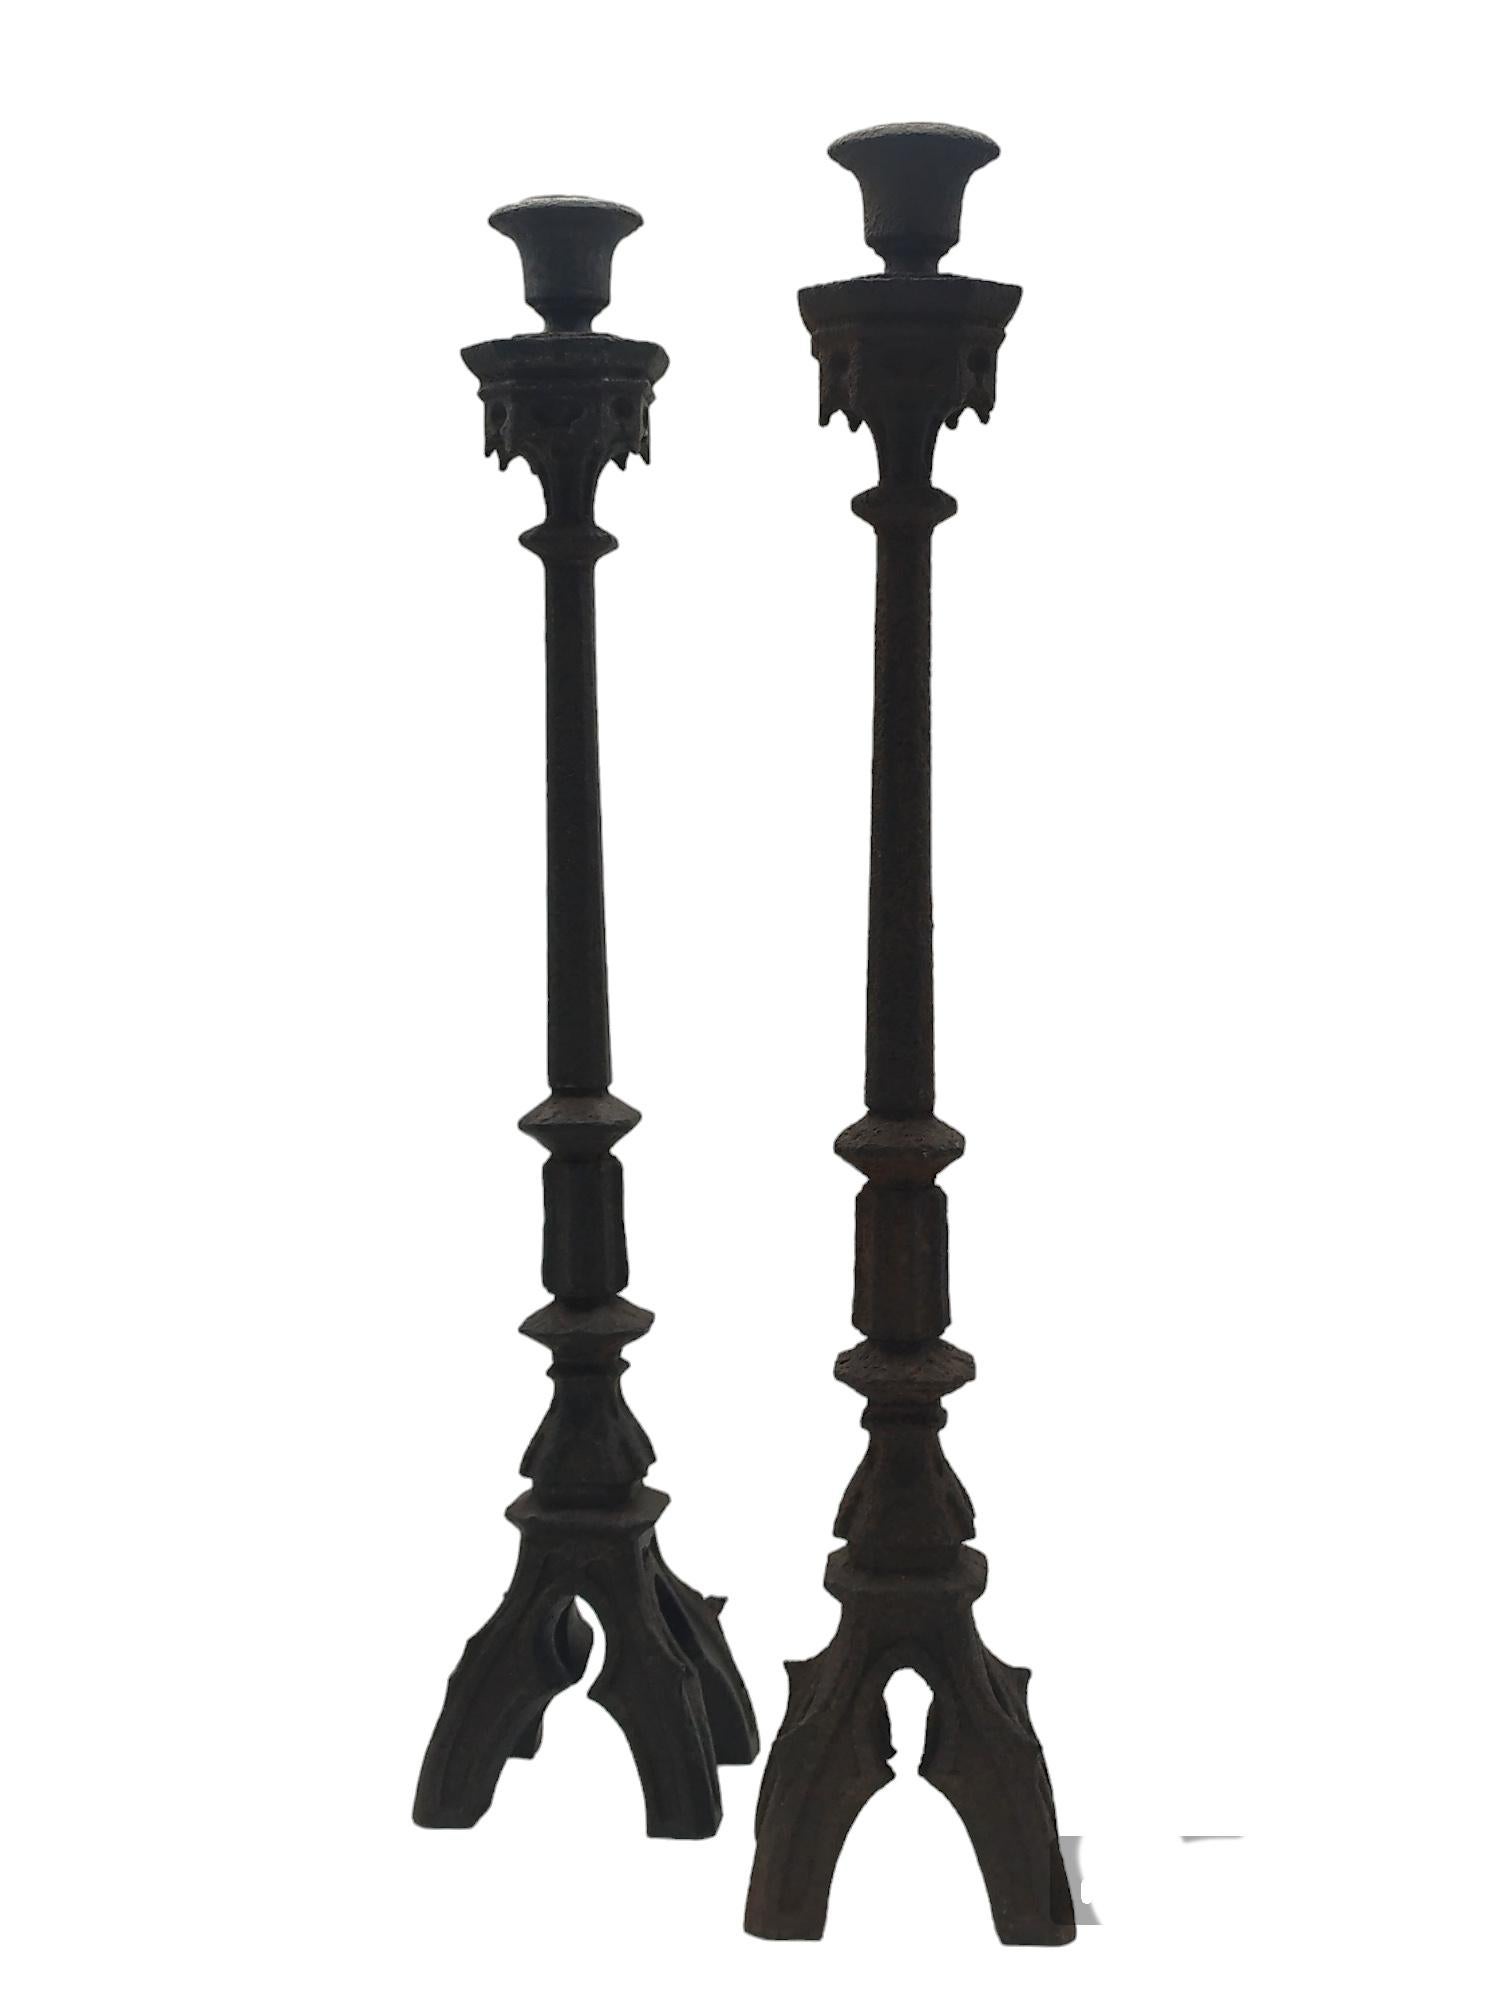 Pair of iron candlesticks in Italian neo-Gothic style with four-foot metal bases. Good overall condition, with excellent patina, wear commensurate with age and use.